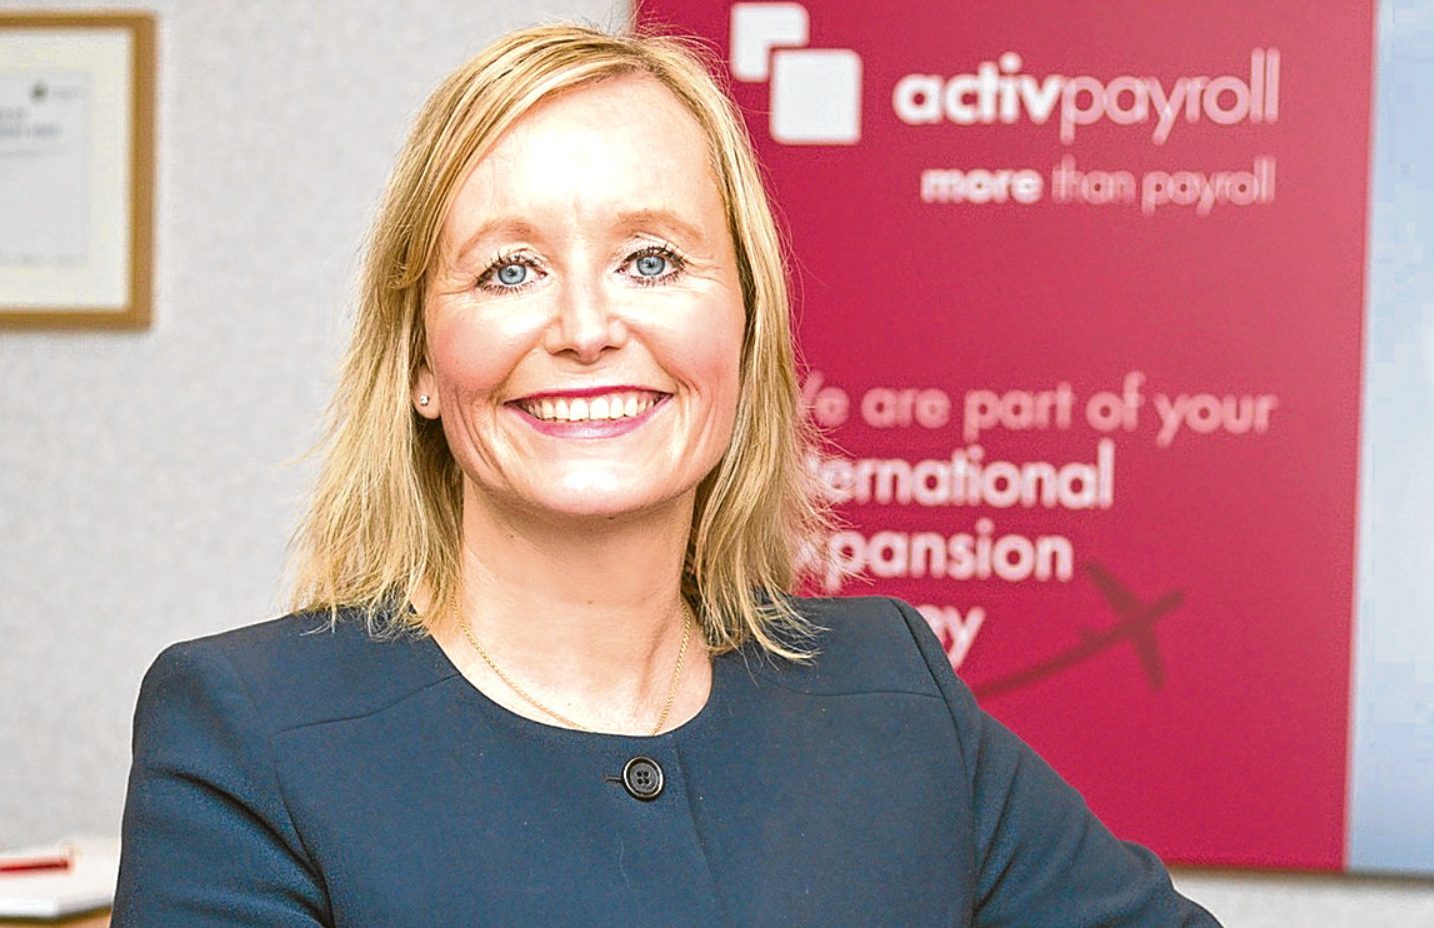 Alison Sellar, Chief Executive Officer of activpayroll